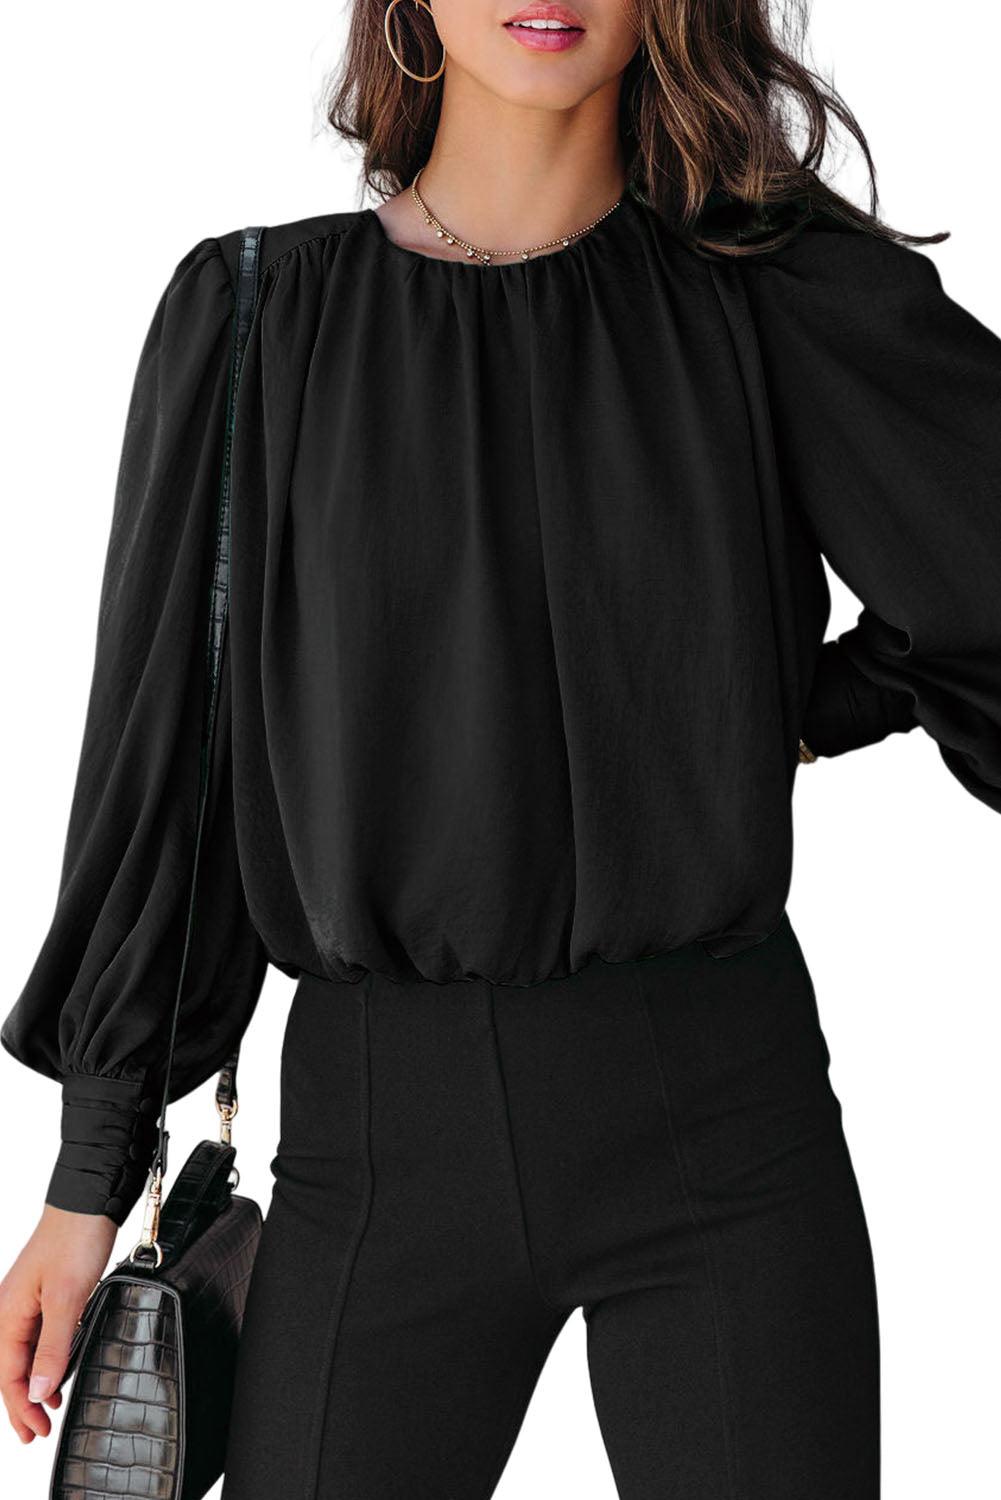 Black Padded Shoulder Buttoned Cuffs Pleated Loose Blouse - L & M Kee, LLC